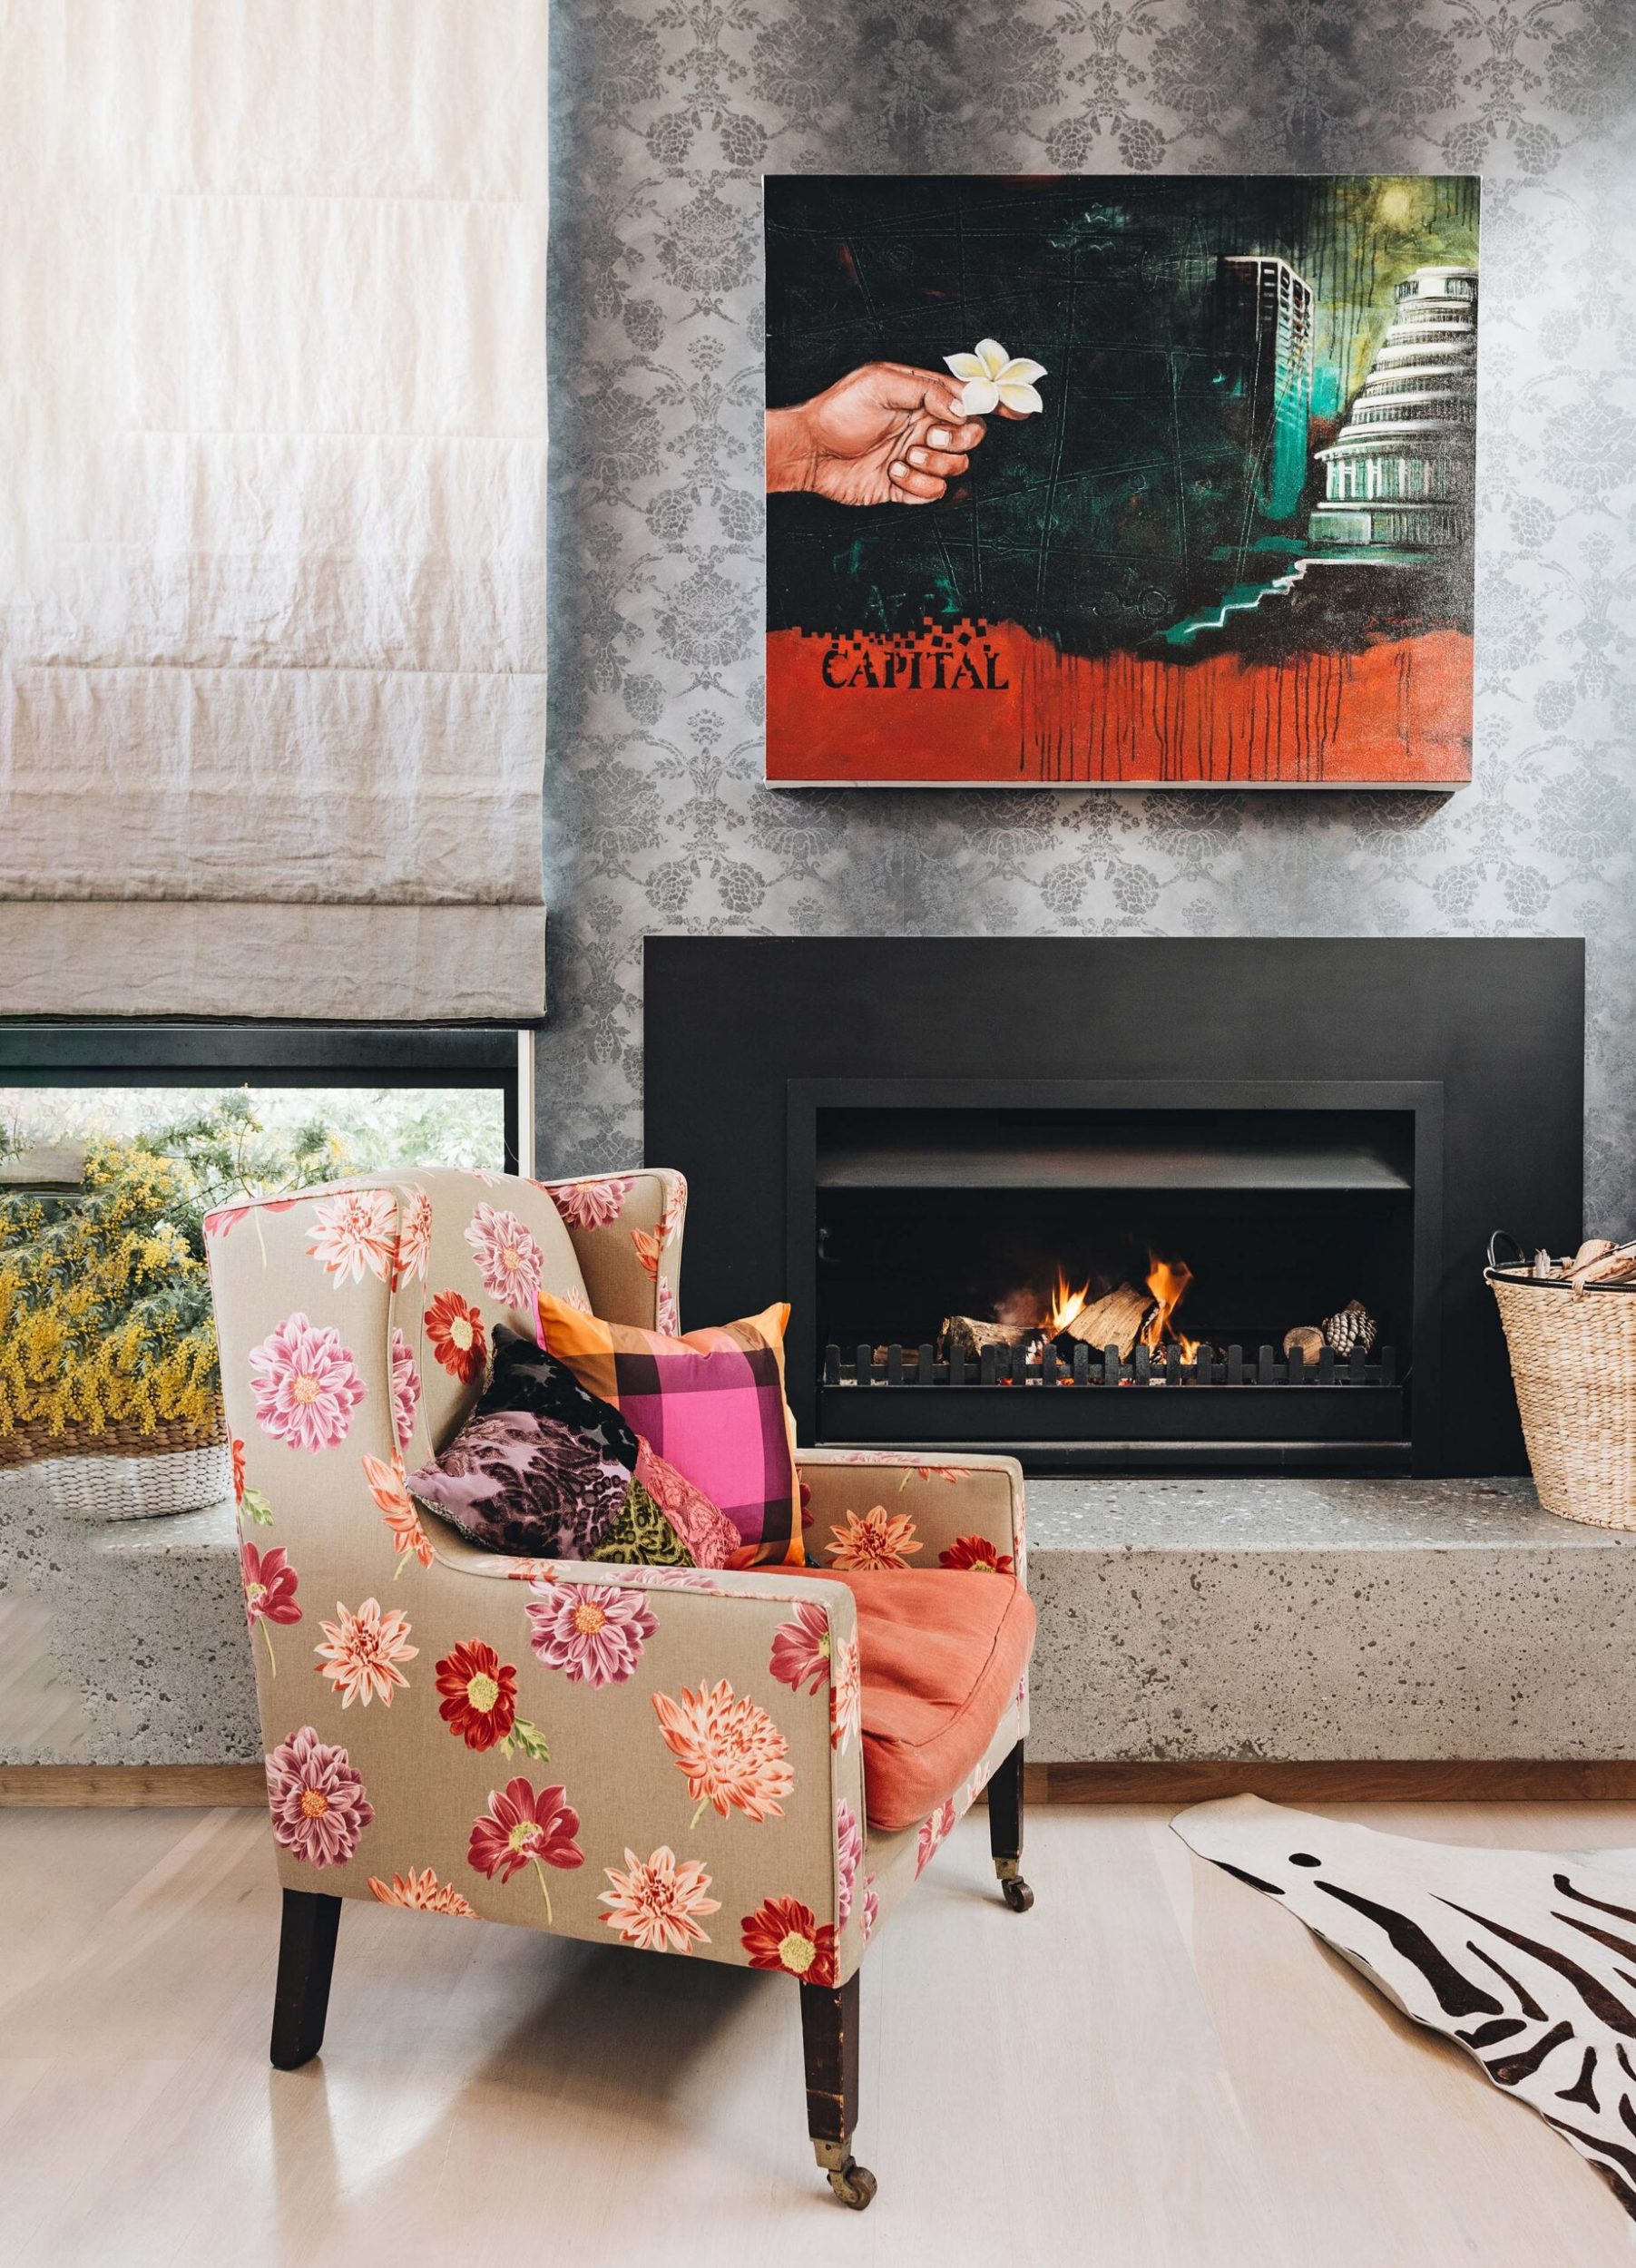 A furnished chair sitting in front of a fireplace with a David Teata painting above it